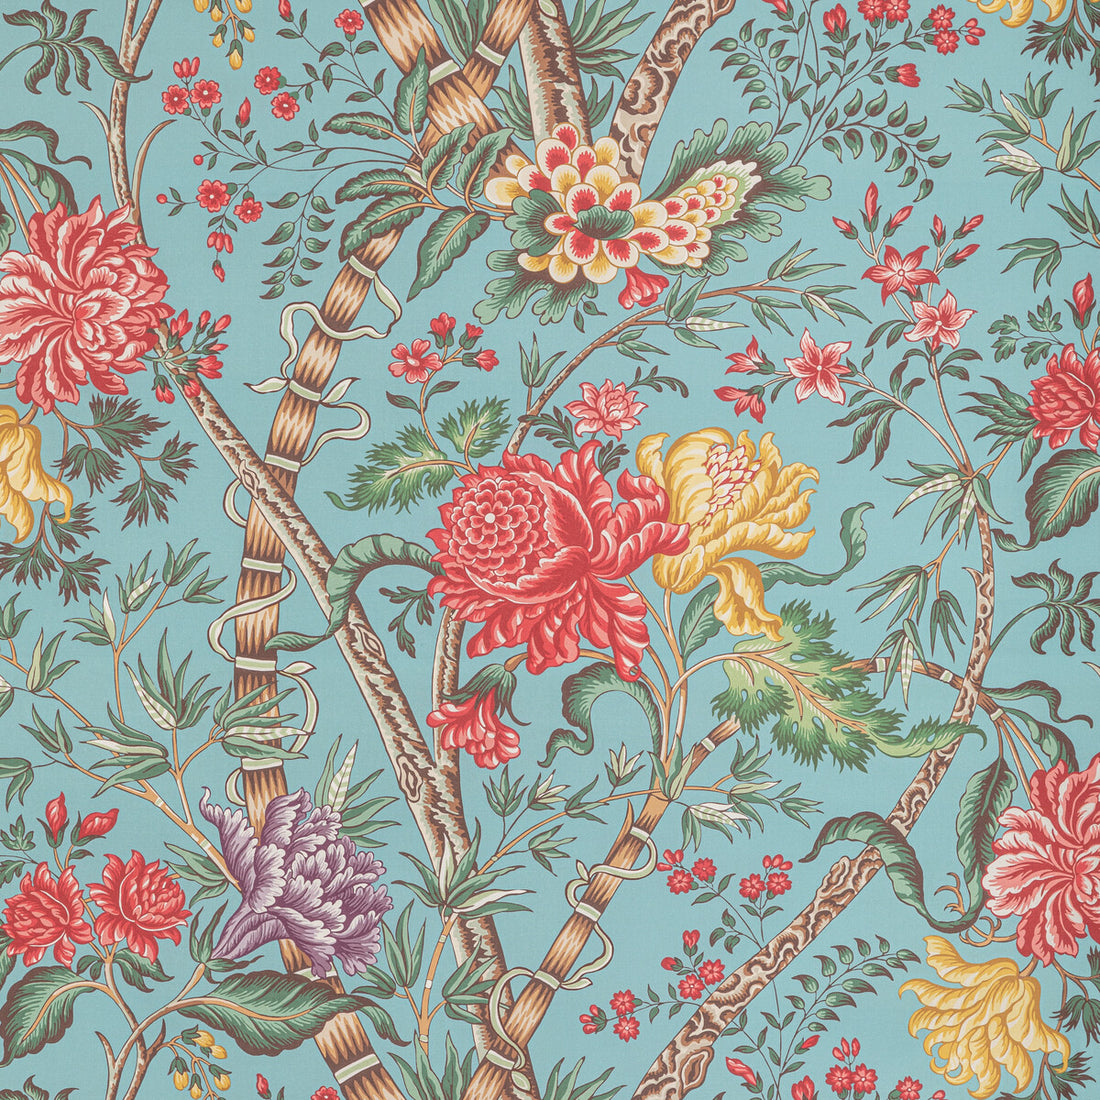 Luberon Print fabric in aqua/multi color - pattern 8022100.1319.0 - by Brunschwig &amp; Fils in the Manoir collection